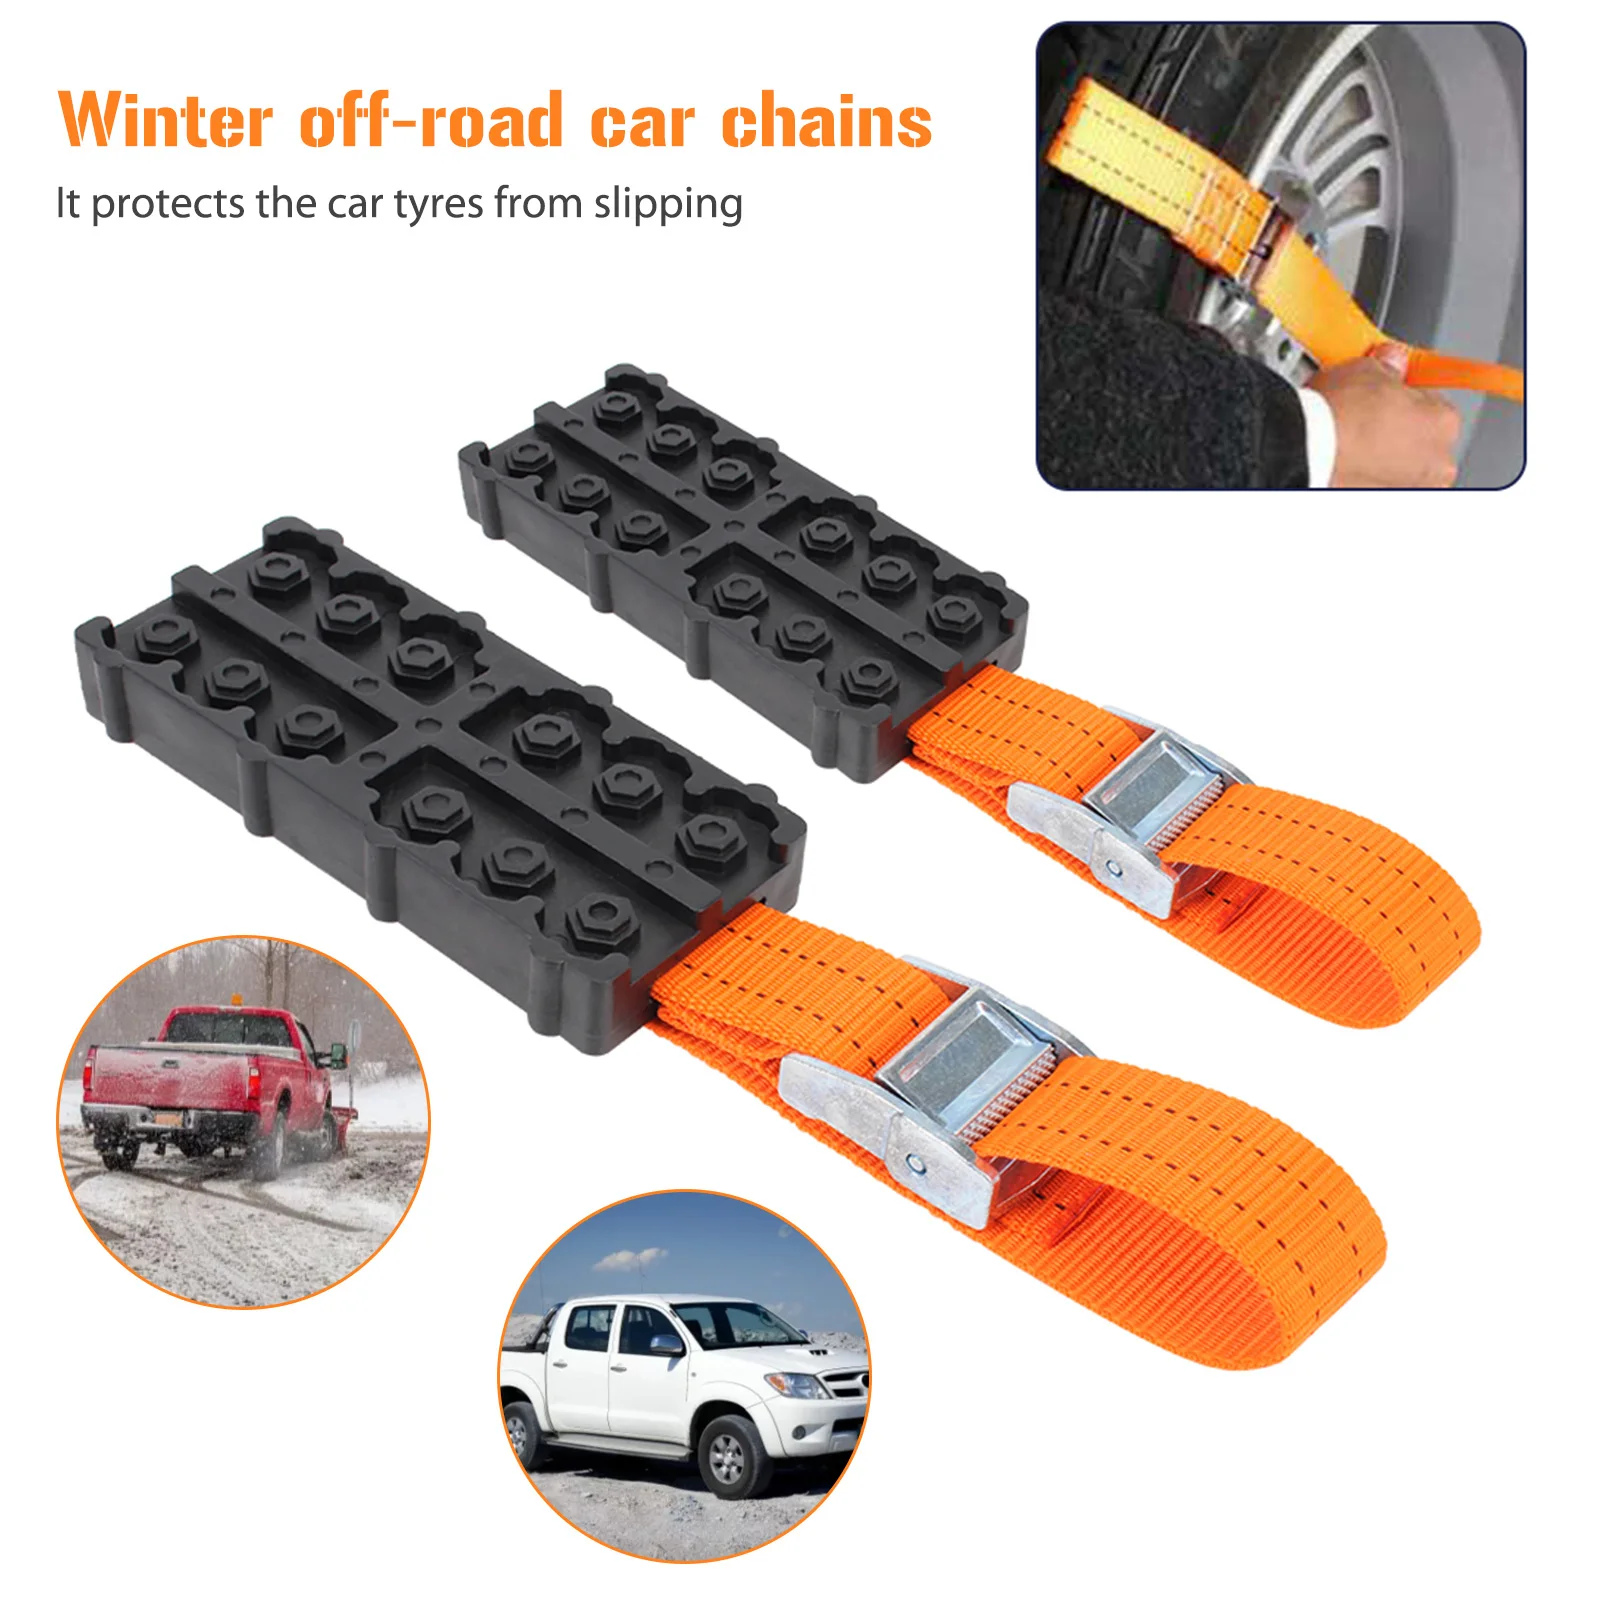 

Multifunctional Off-road Vehicle Escape Belt Mud Road Traction Block Universal Car Wheels Safety Chains for Driving Safety